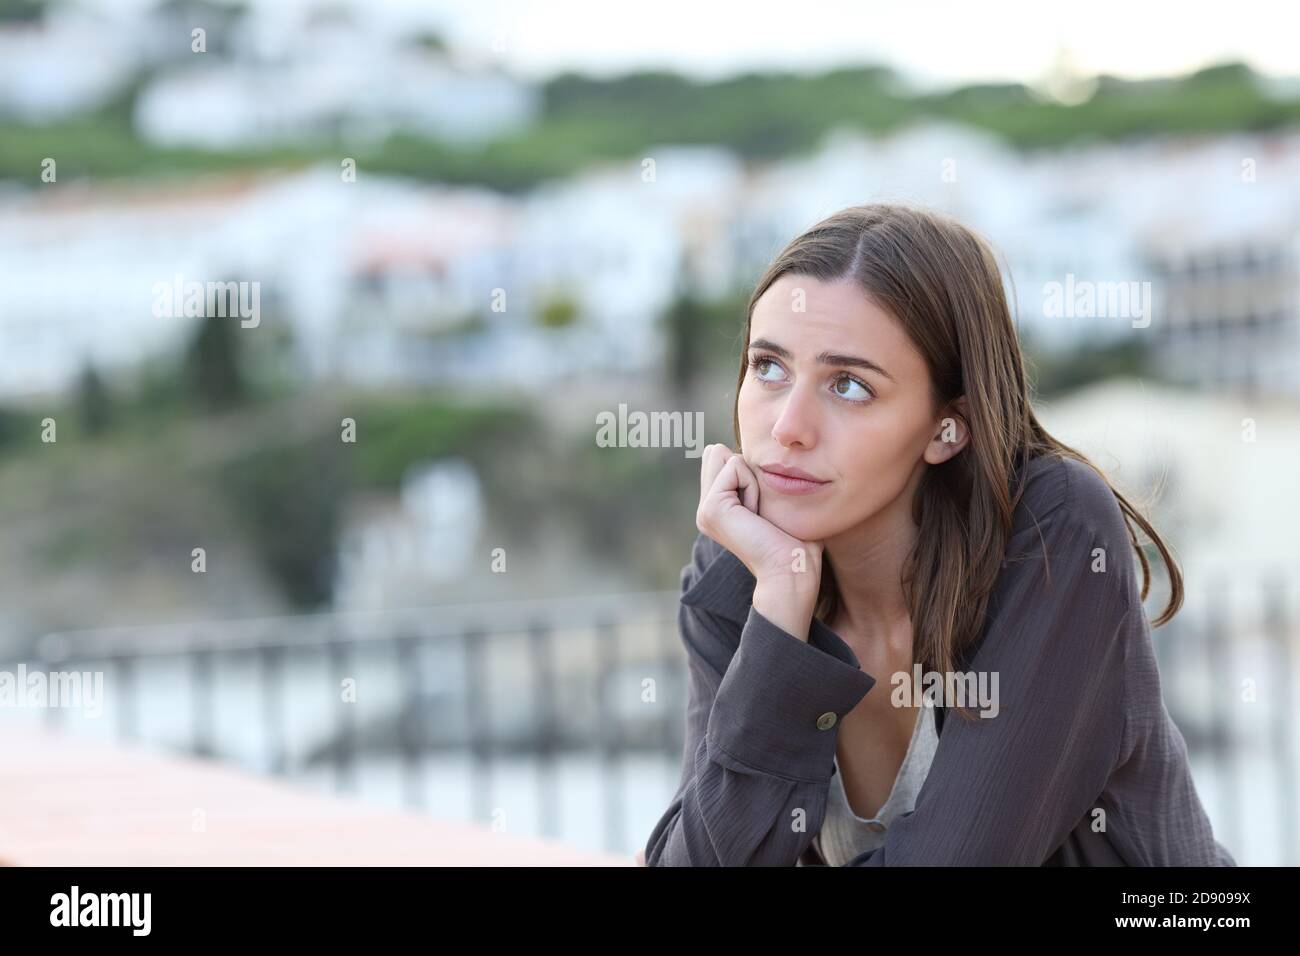 Worried woman thinking looking at side from a balcony in a beach town on vacation Stock Photo